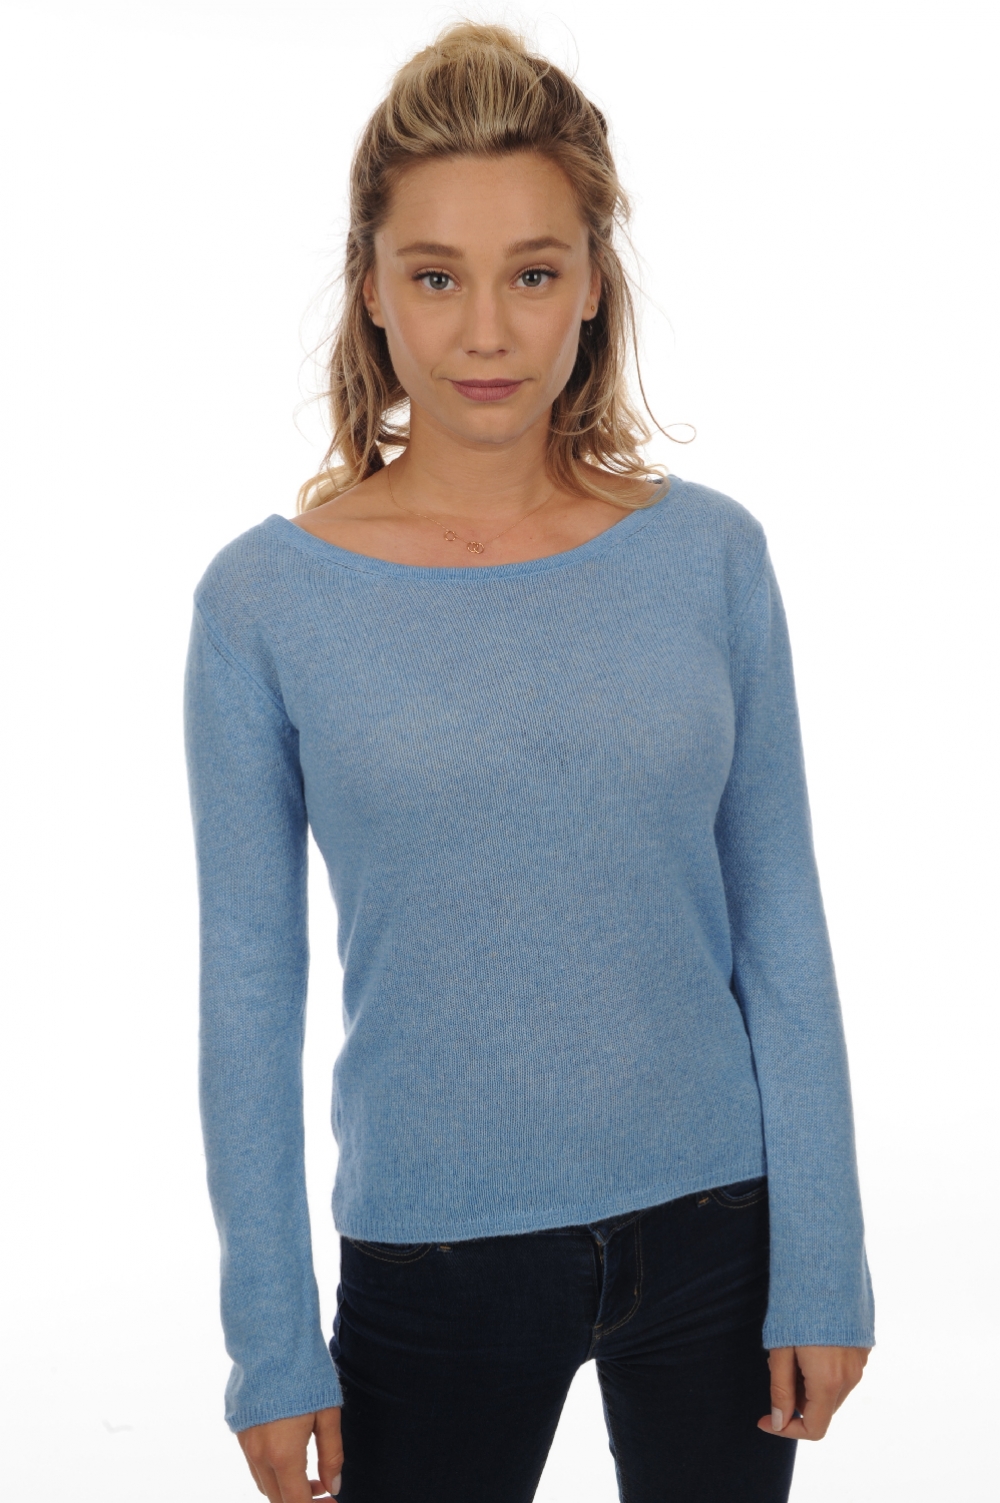 Cashmere ladies basic sweaters at low prices caleen azur blue chine xl